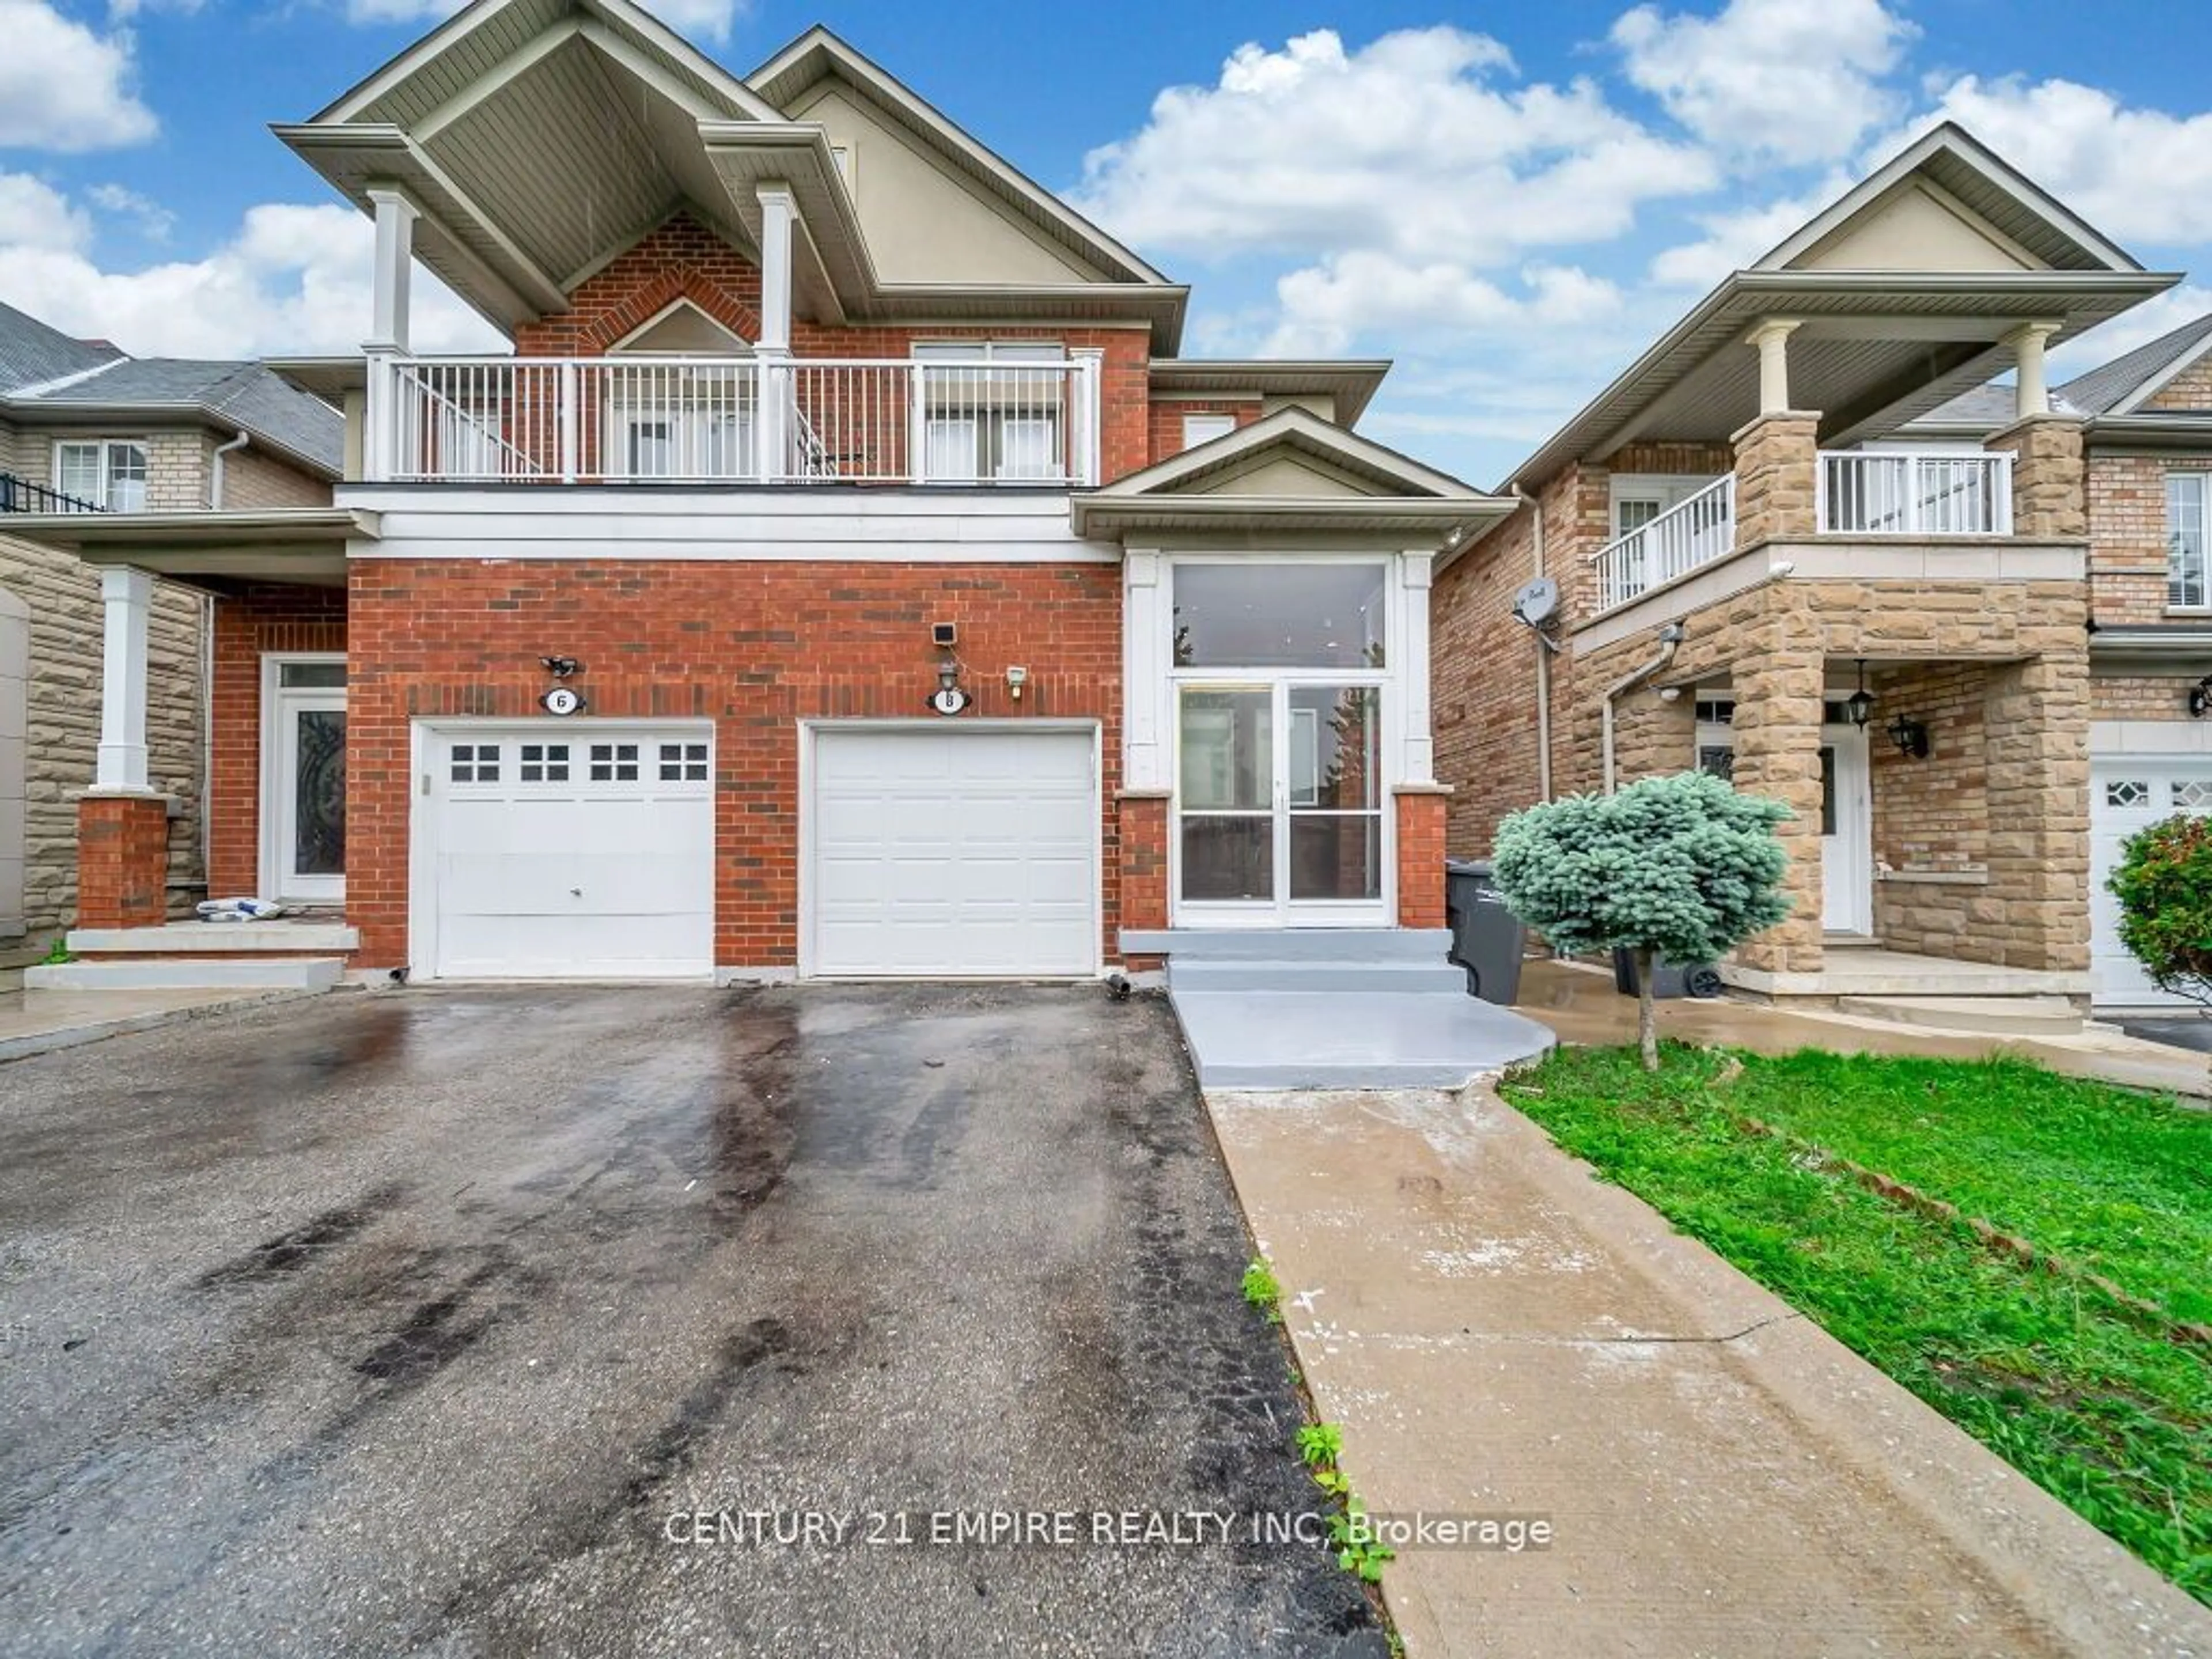 Home with brick exterior material for 8 Pennyroyal Cres, Brampton Ontario L6S 6J8